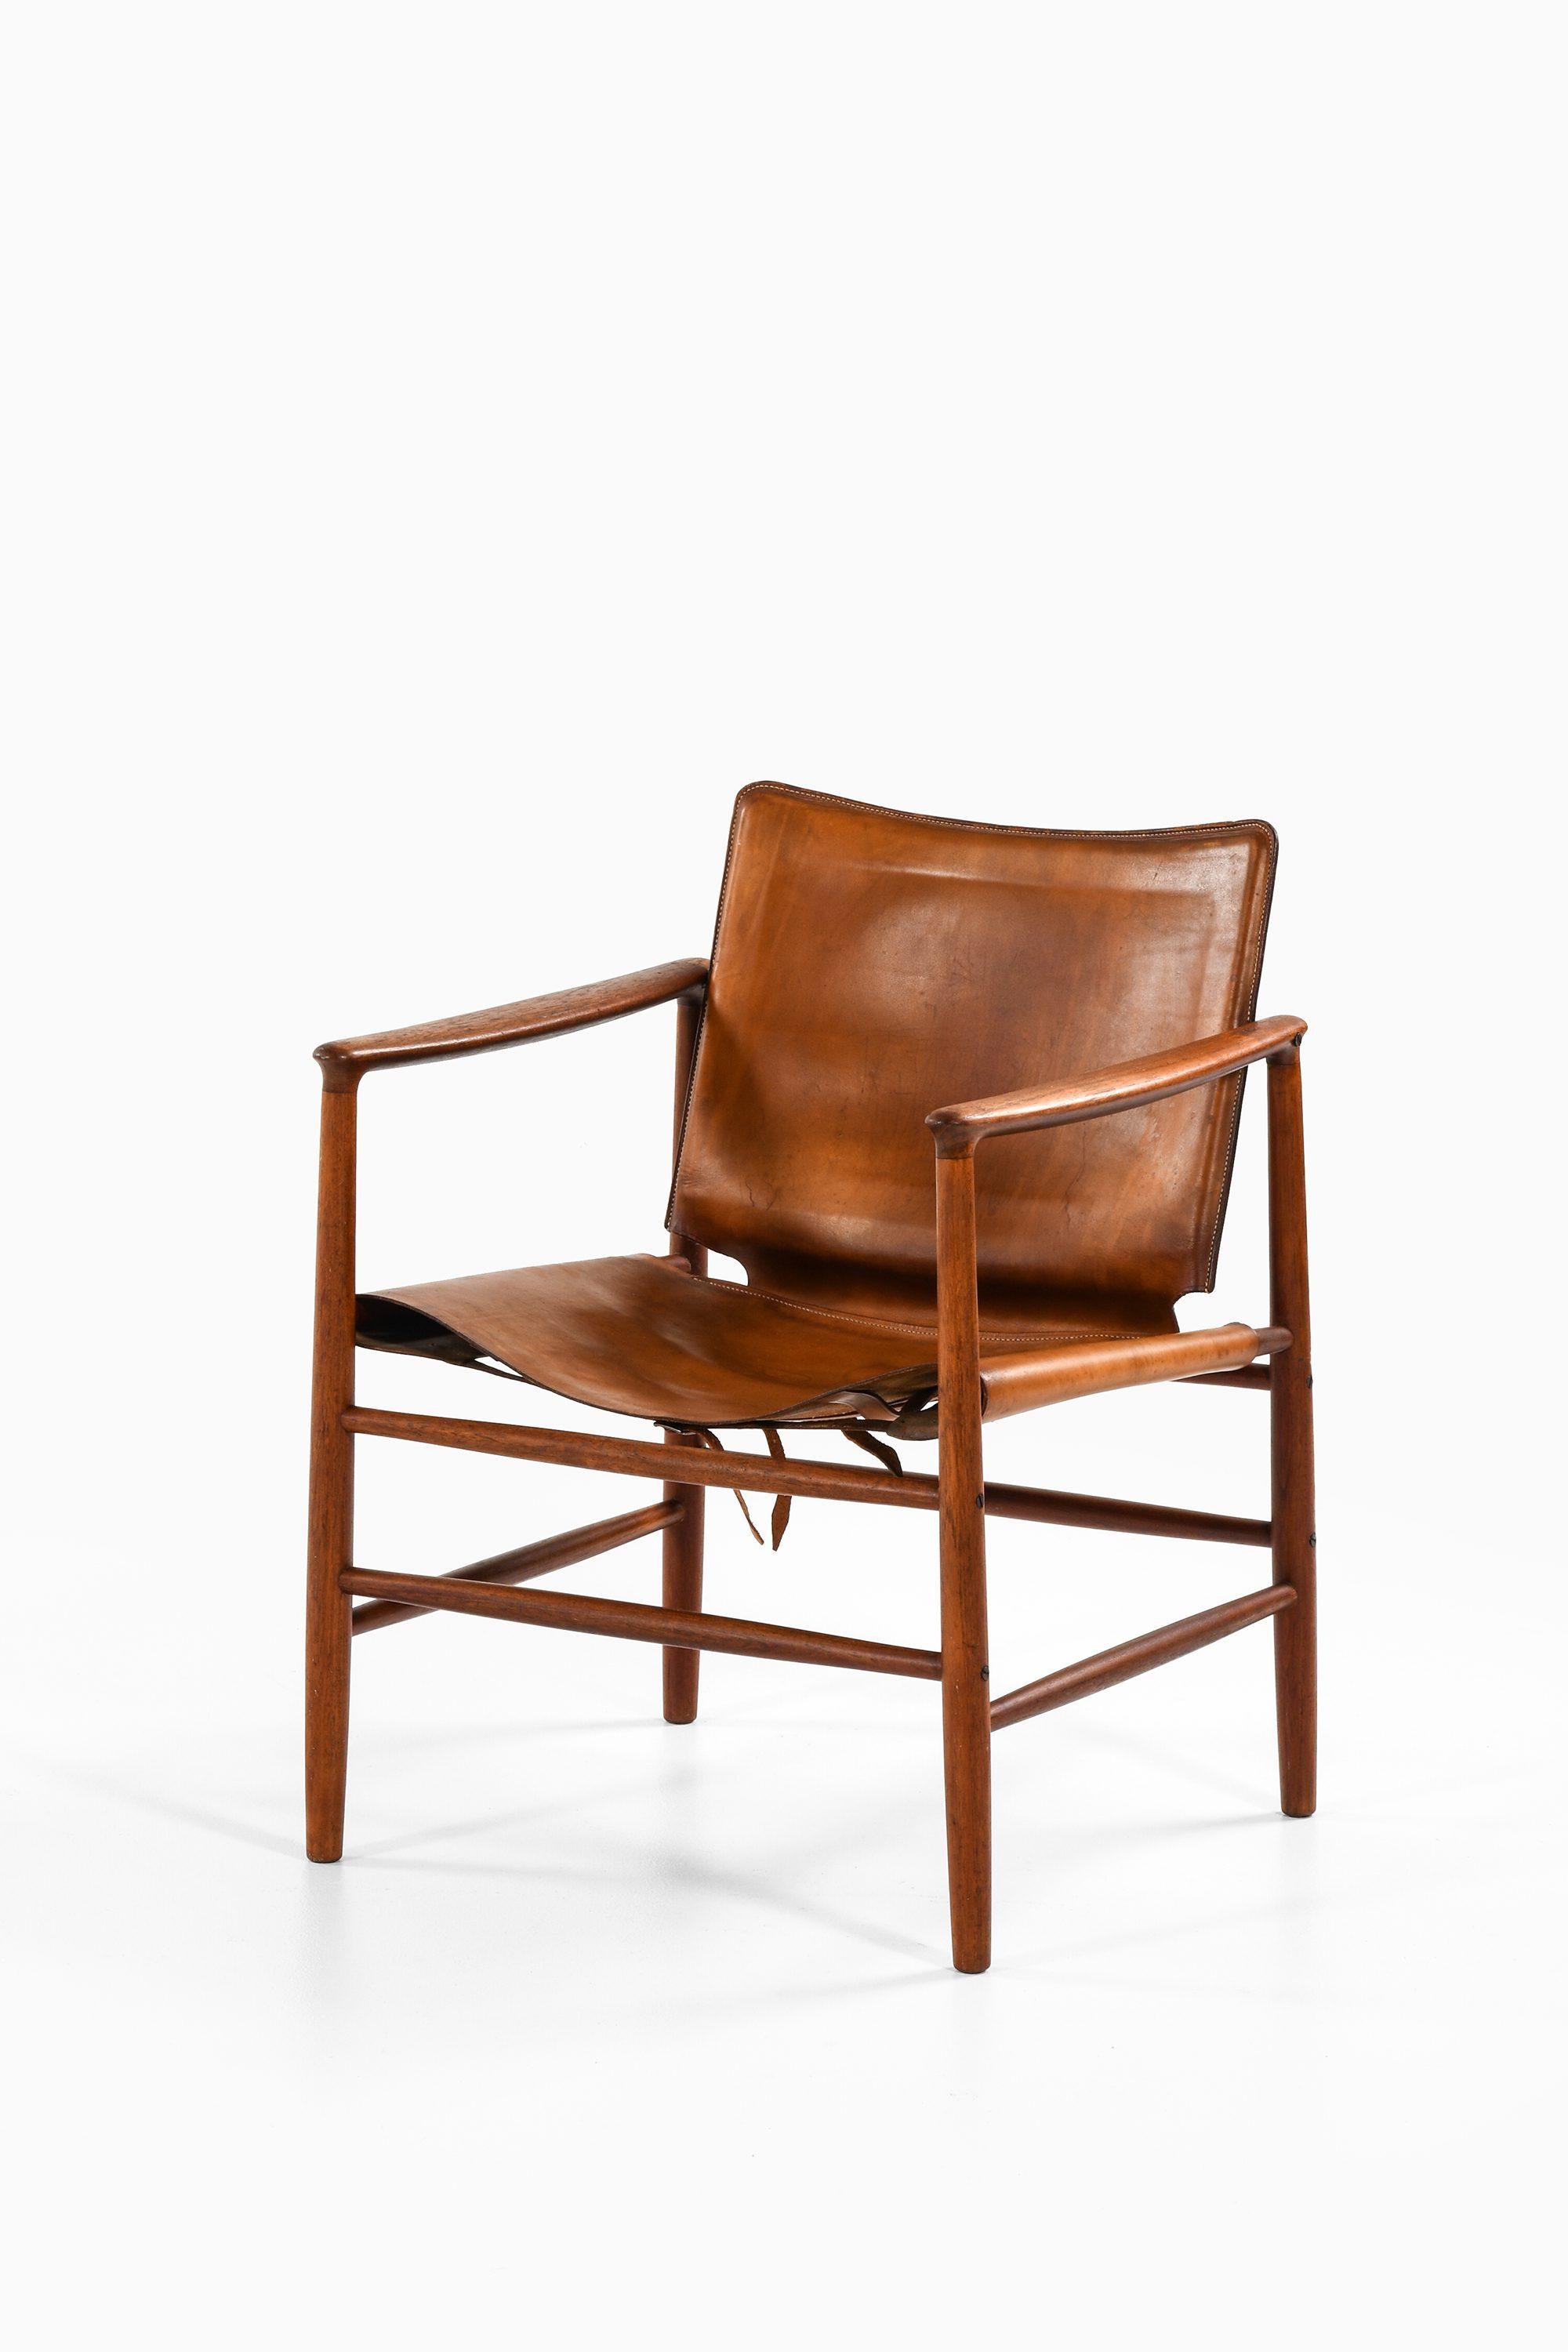 Armchair in Teak and Leather by Kai Lyngfeldt Larsen, 1957

Additional Information:
Material: Teak and leather
Style: Mid century, Scandinavian
Produced by Bovirke in Denmark
Dimensions (W x D x H): 58.5 x 60 x 75 cm
Seat Height: 37 cm
Condition: